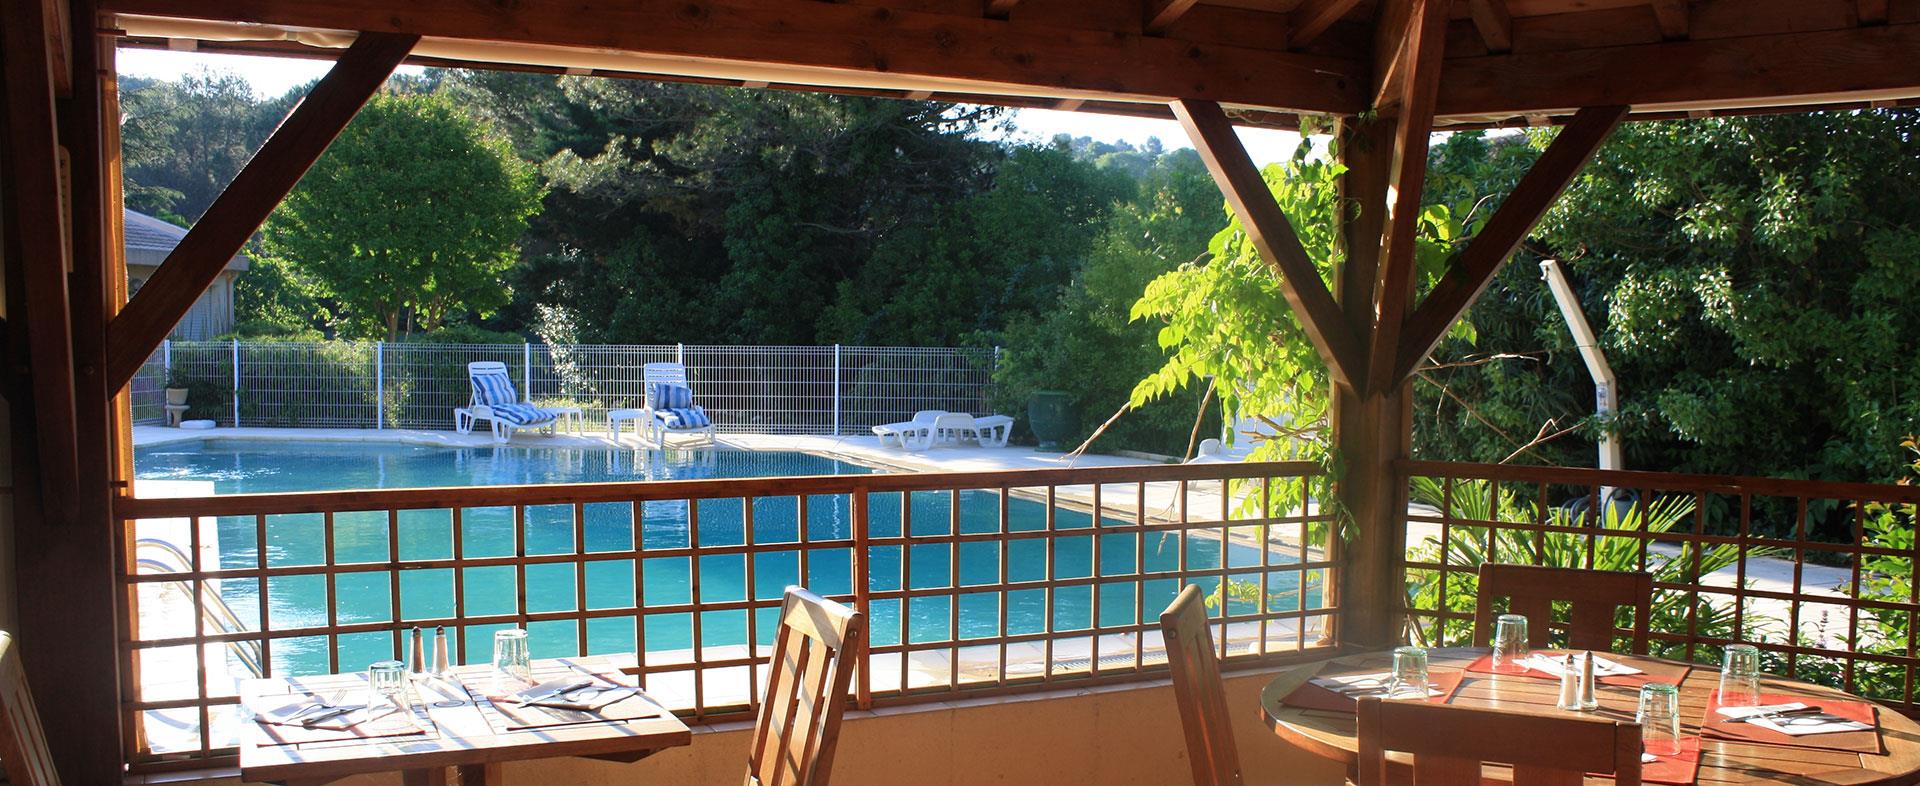 View across the pool from the terrace of the hotel Saint Benoit located in Hérault